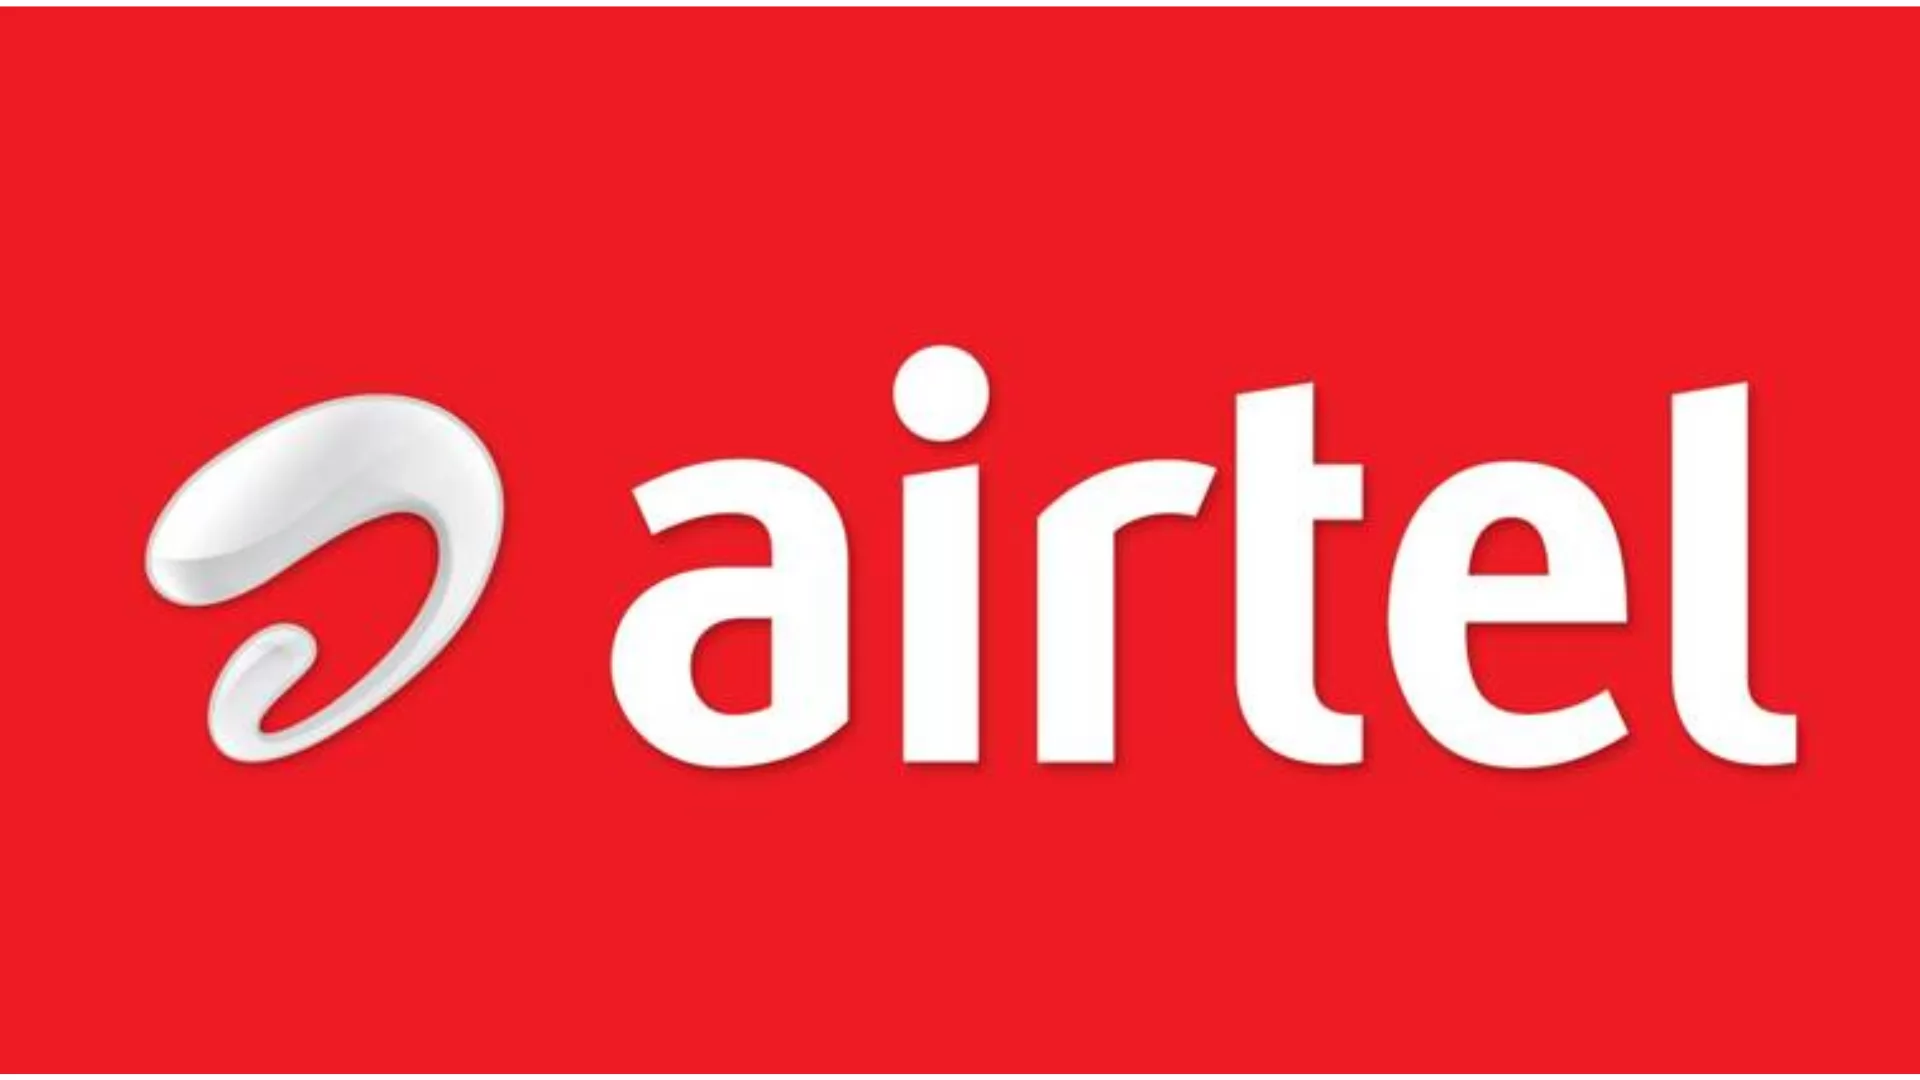 How To Watch Jamtara Season 2 For free with Airtel Postpaid?